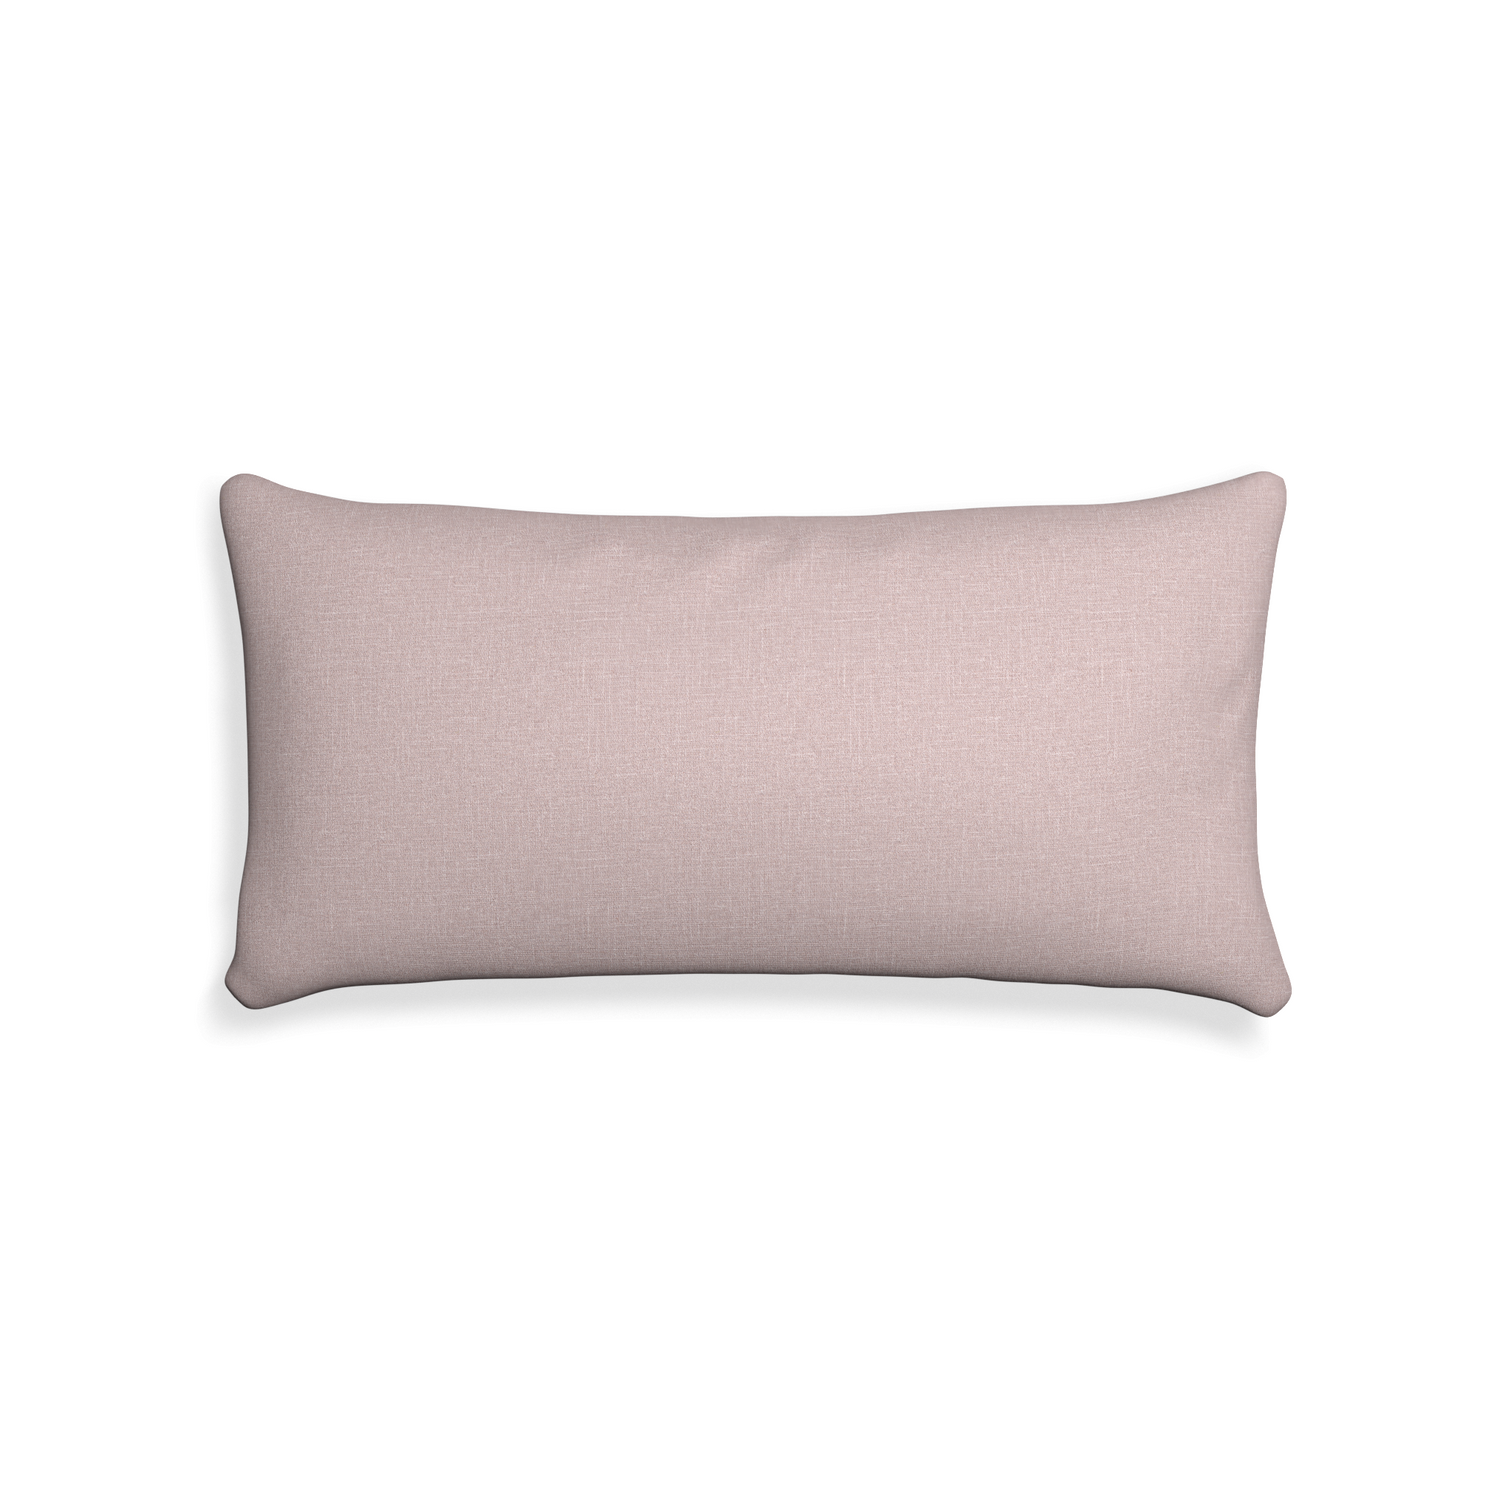 Midi-lumbar orchid custom mauve pinkpillow with none on white background